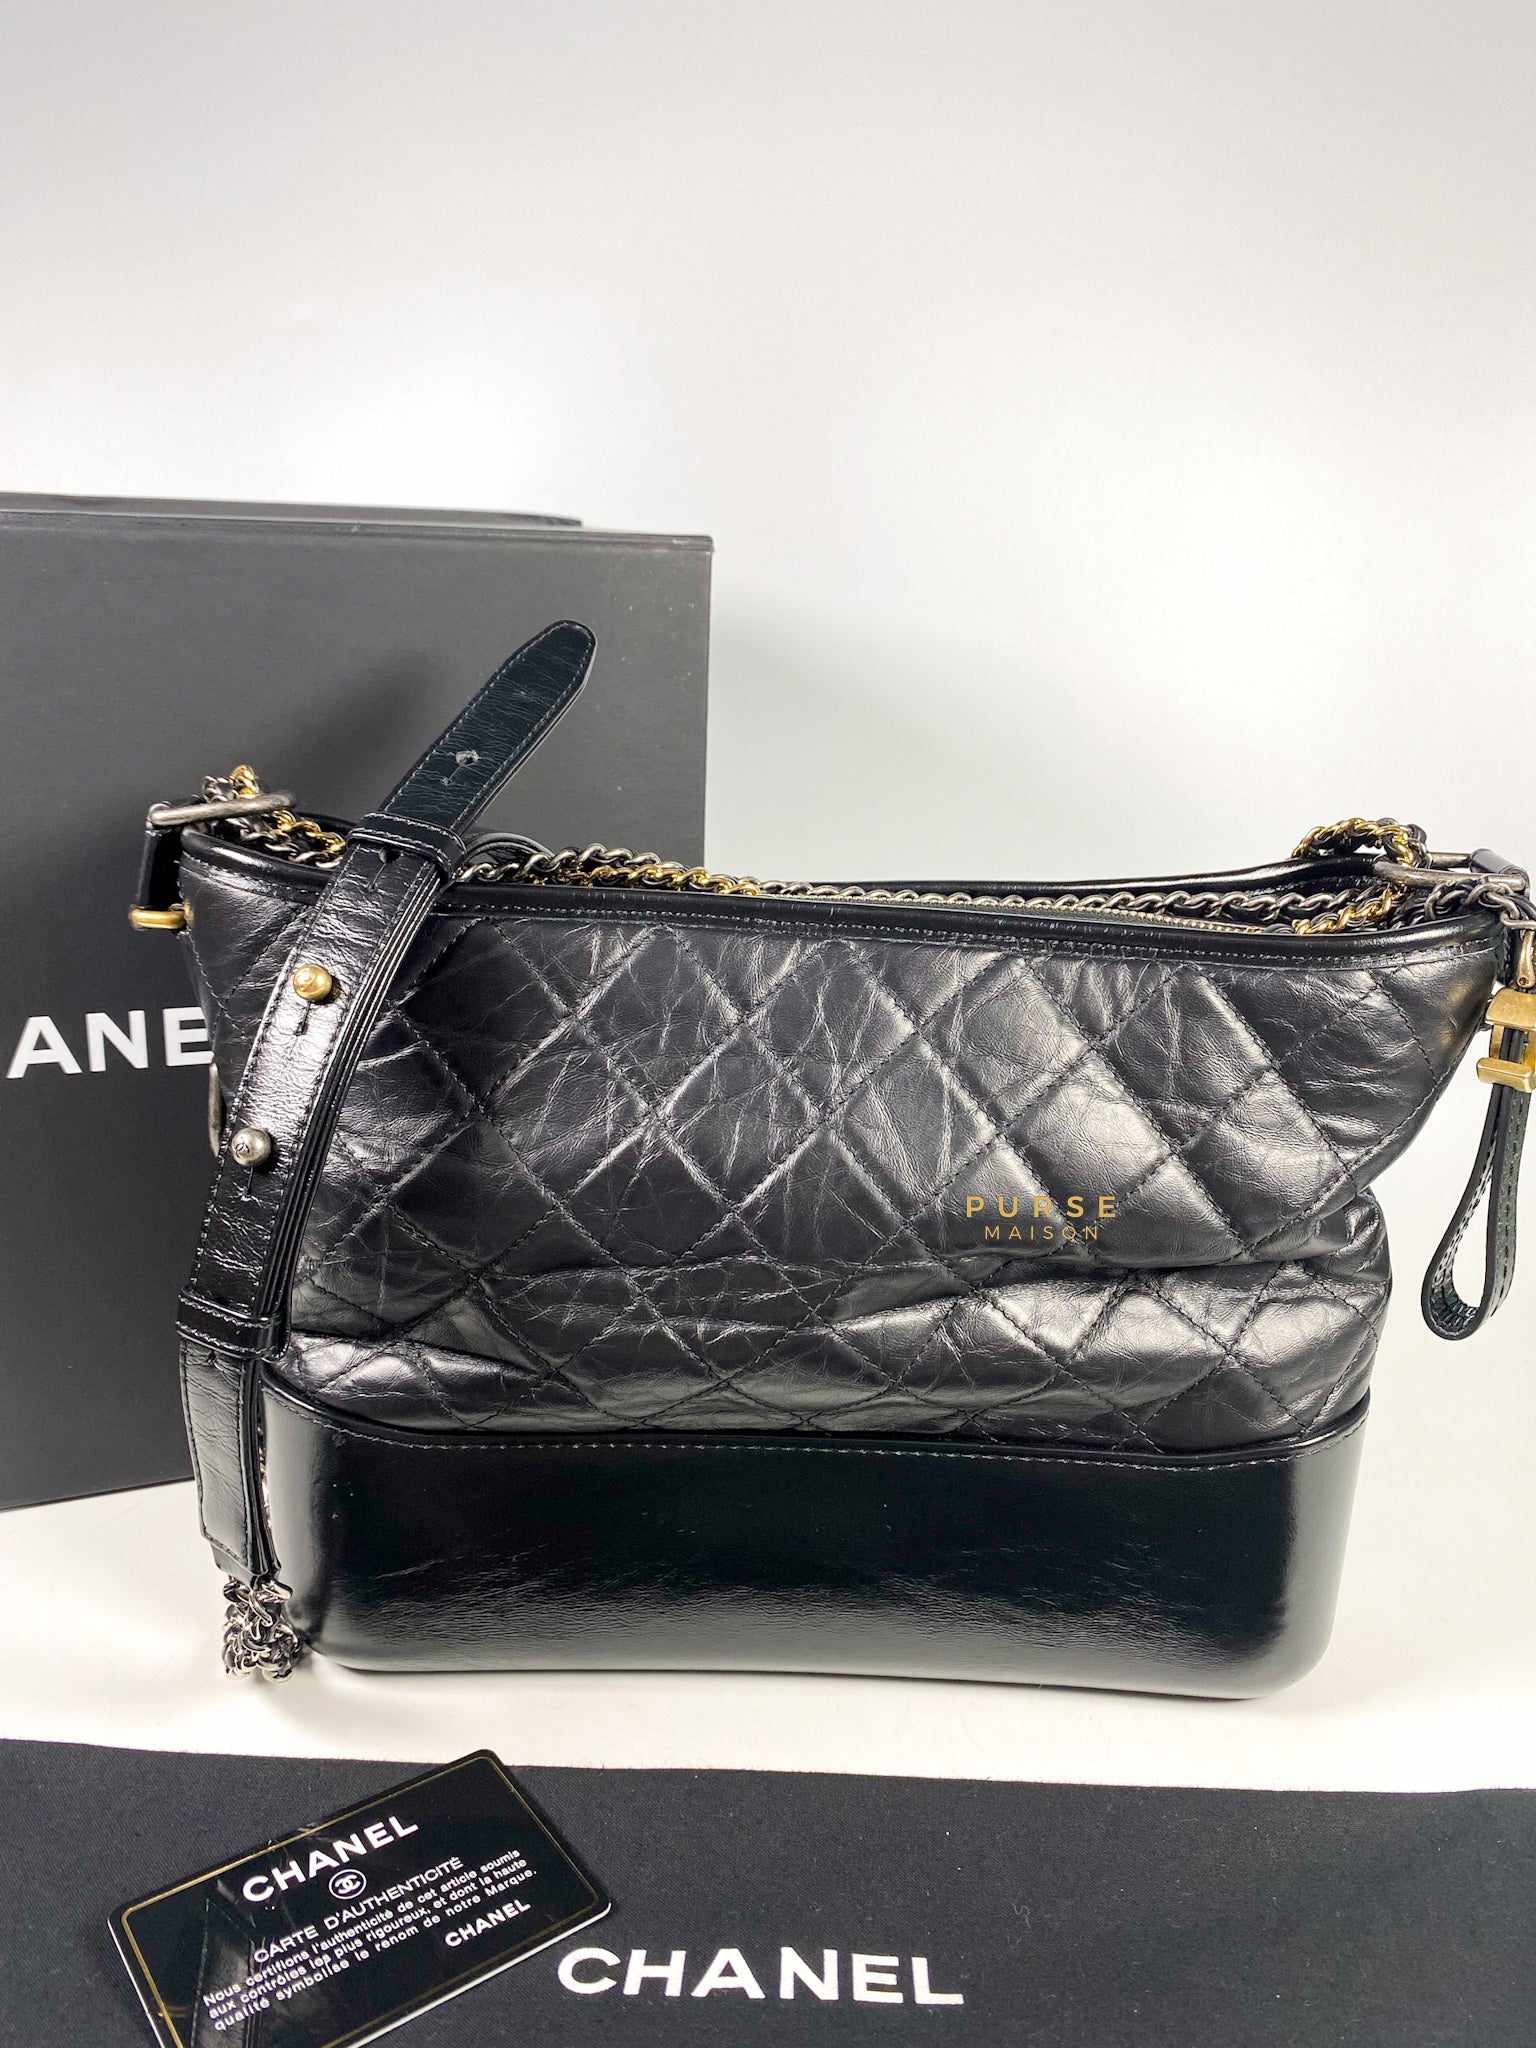 Chanel Gabrielle Medium Hobo Bag in Black Distressed Calfskin Leather & mixed hardware (Series 25)